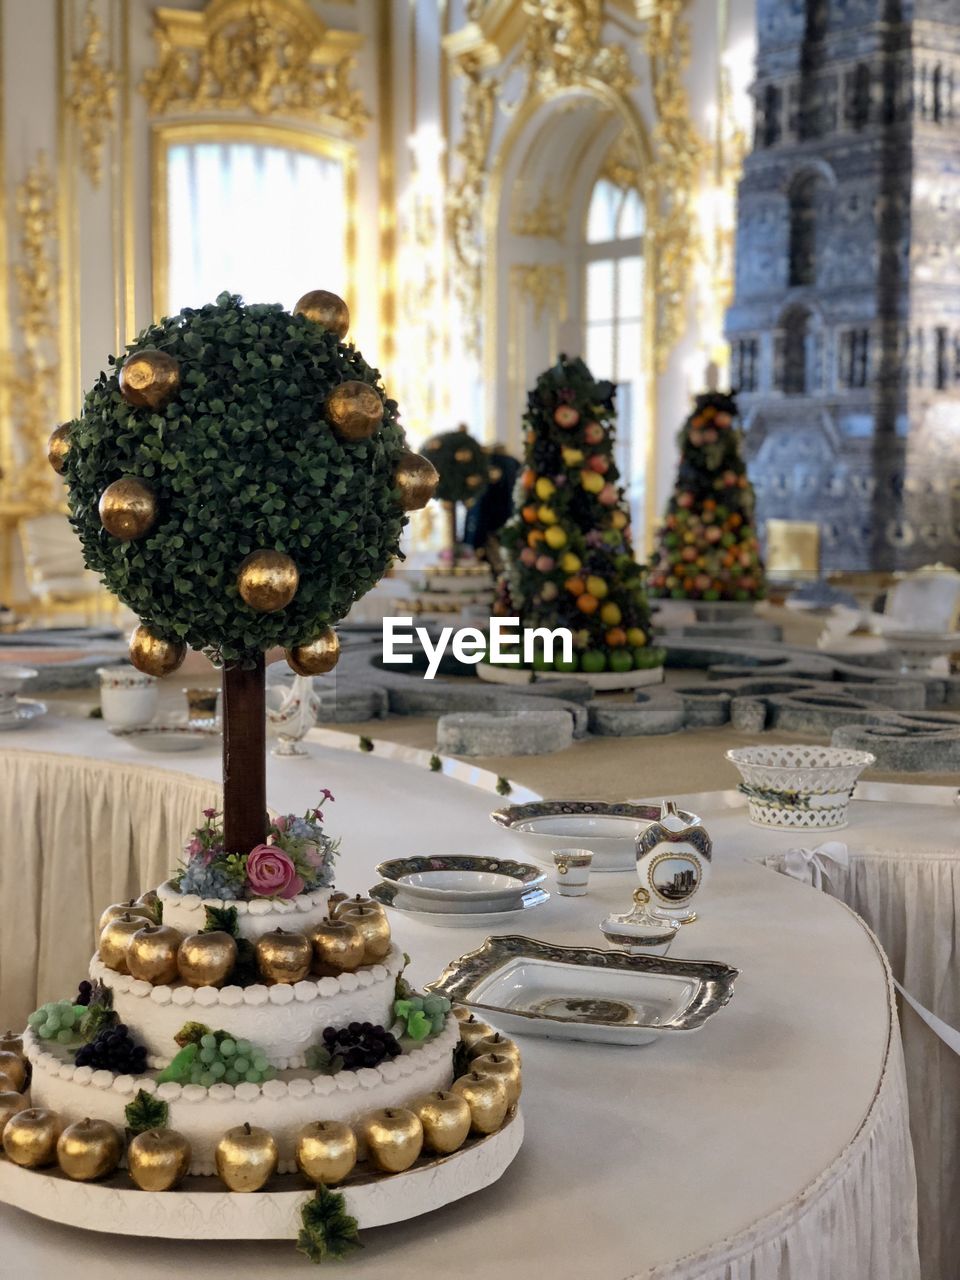 Cakes on tables during celebration